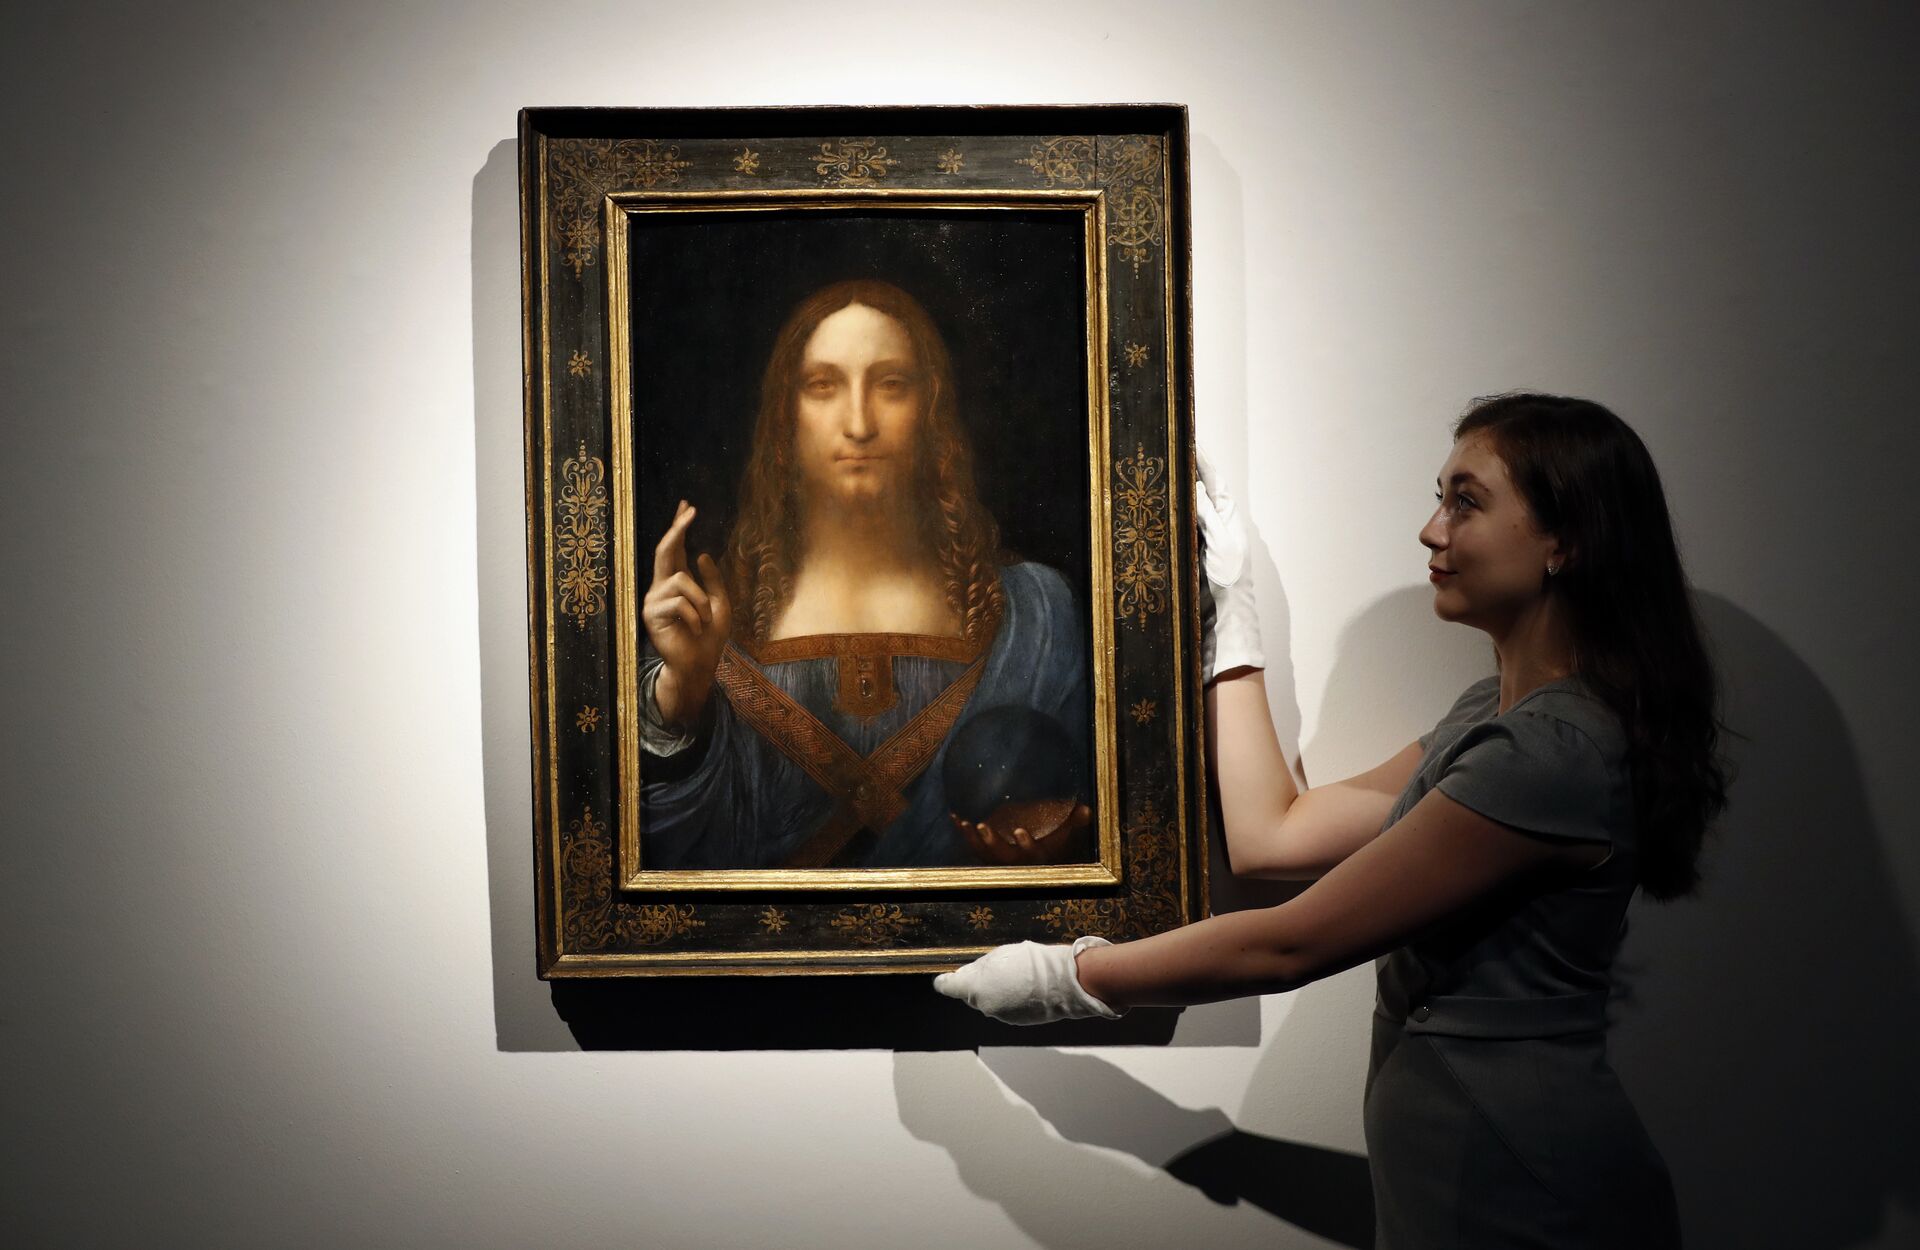 Da Vinci May Be the Author of 'Salvator Mundi', Allegedly Owned by Saudi Crown Prince, Report Claims - Sputnik International, 1920, 13.04.2021